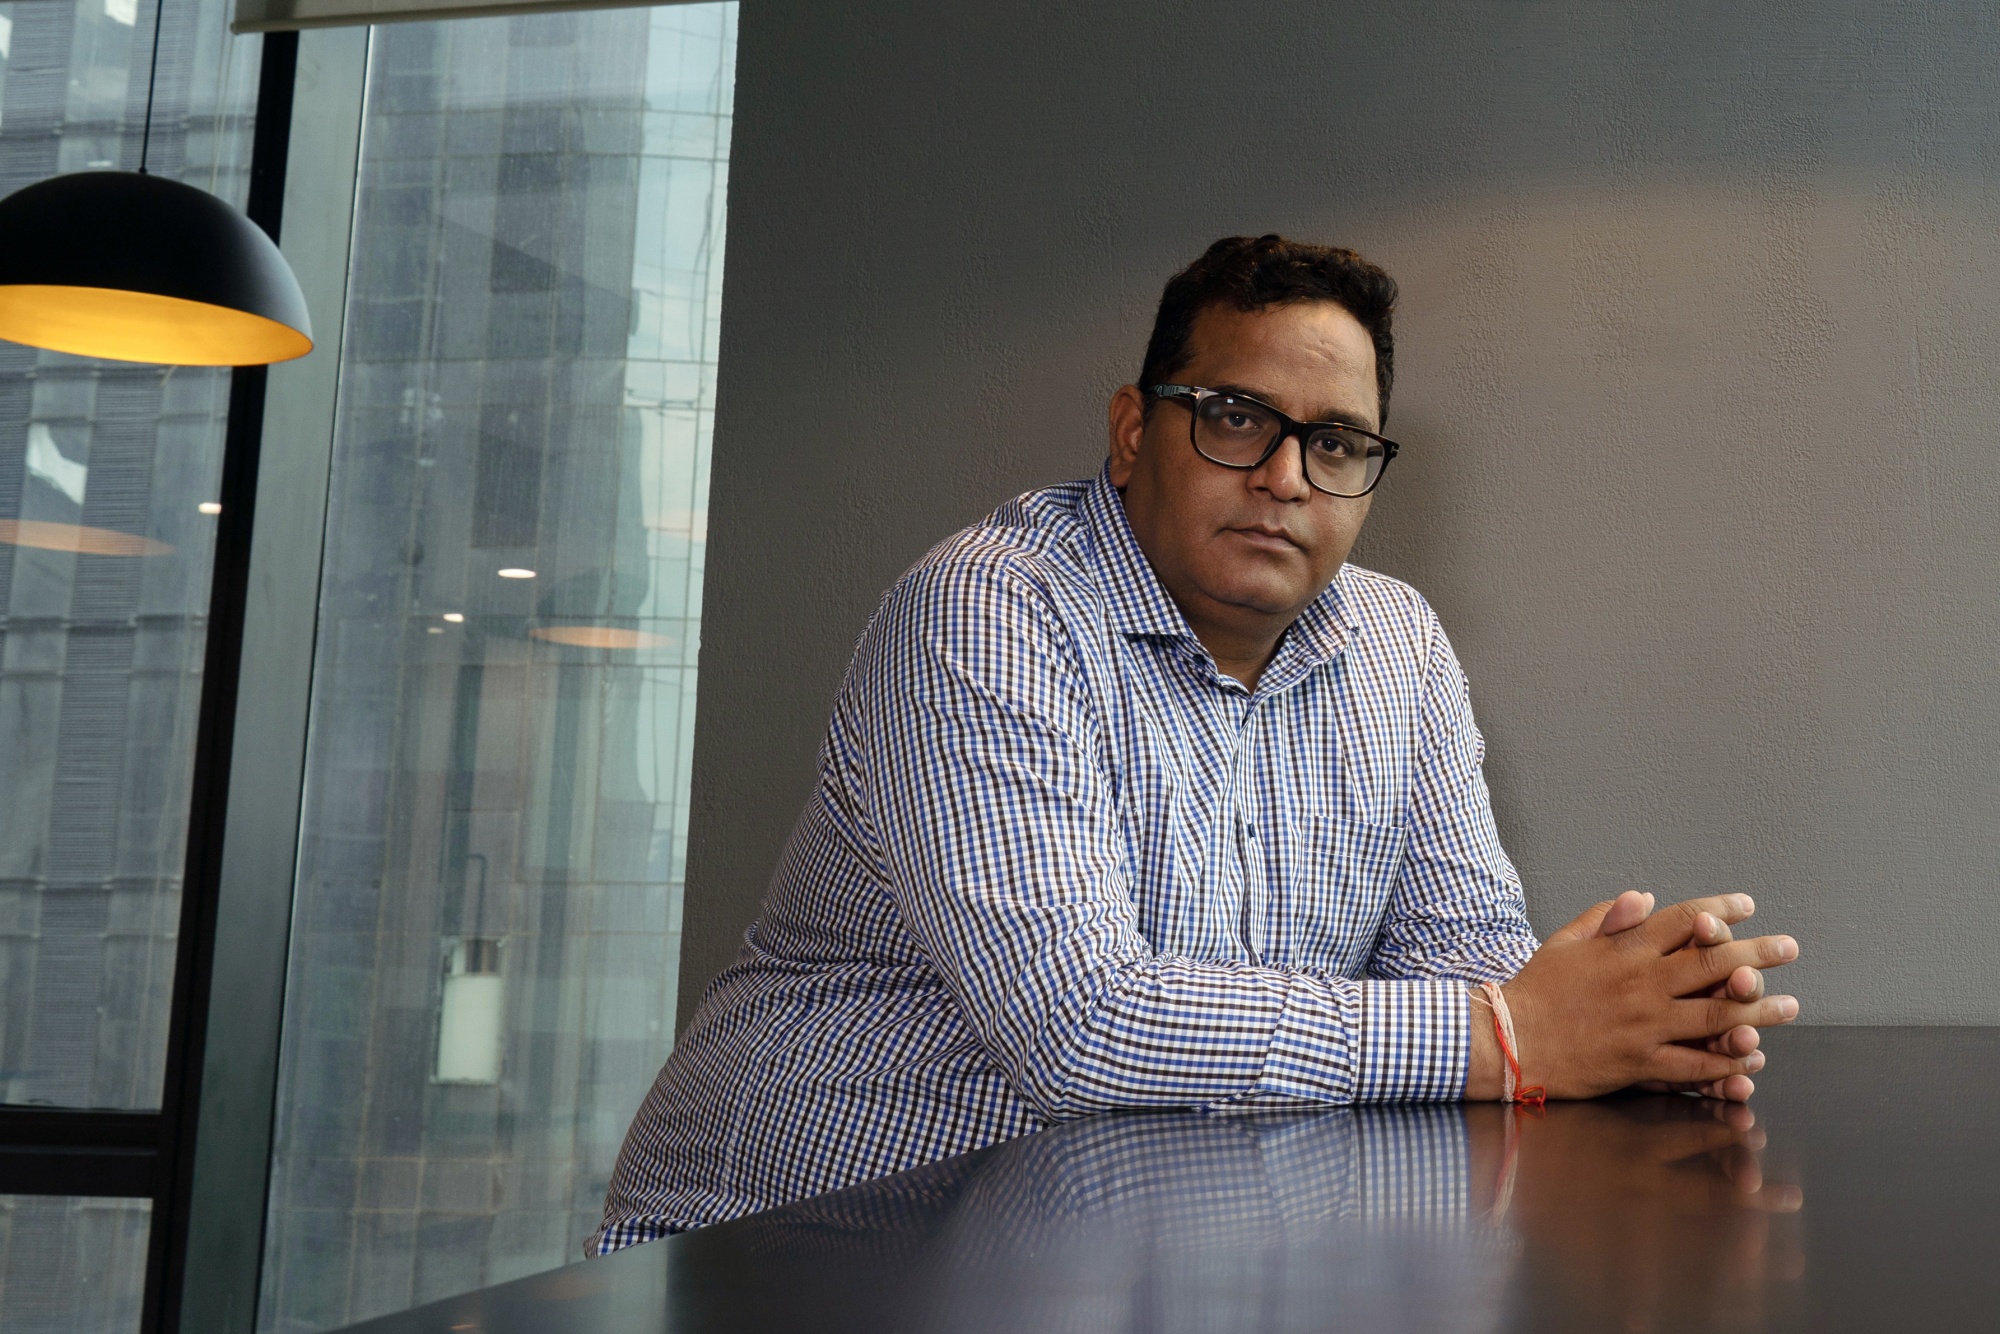 Paytm Founder Says He’s Looking for Chances to Raise Stake - Bloomberg